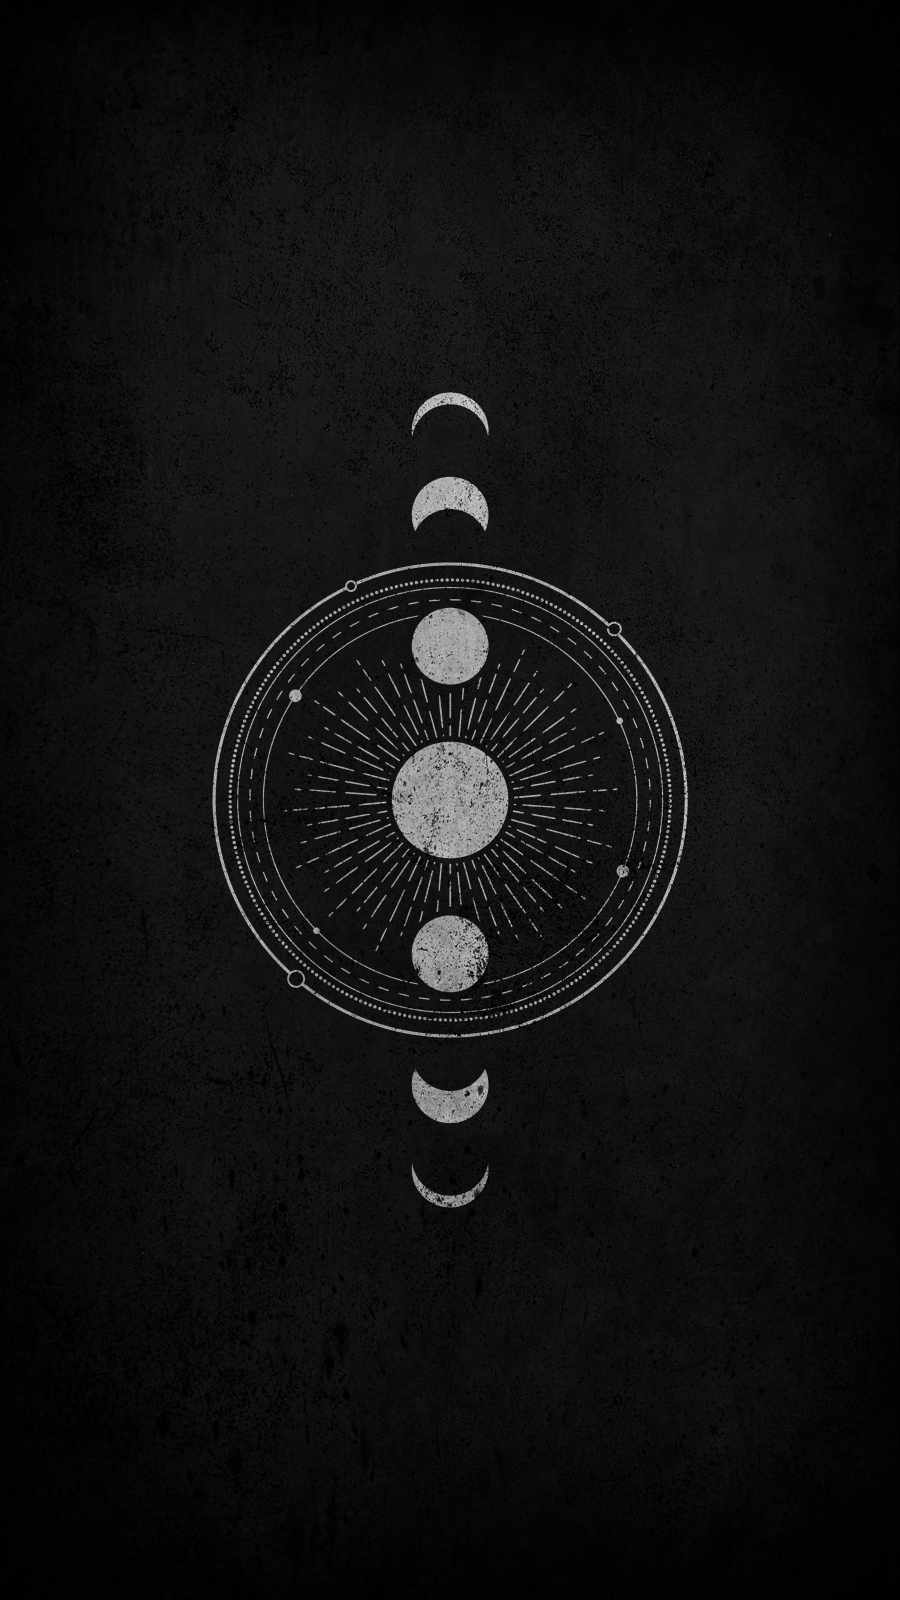 Phases Of Moon IPhone Wallpaper Wallpaper, iPhone Wallpaper